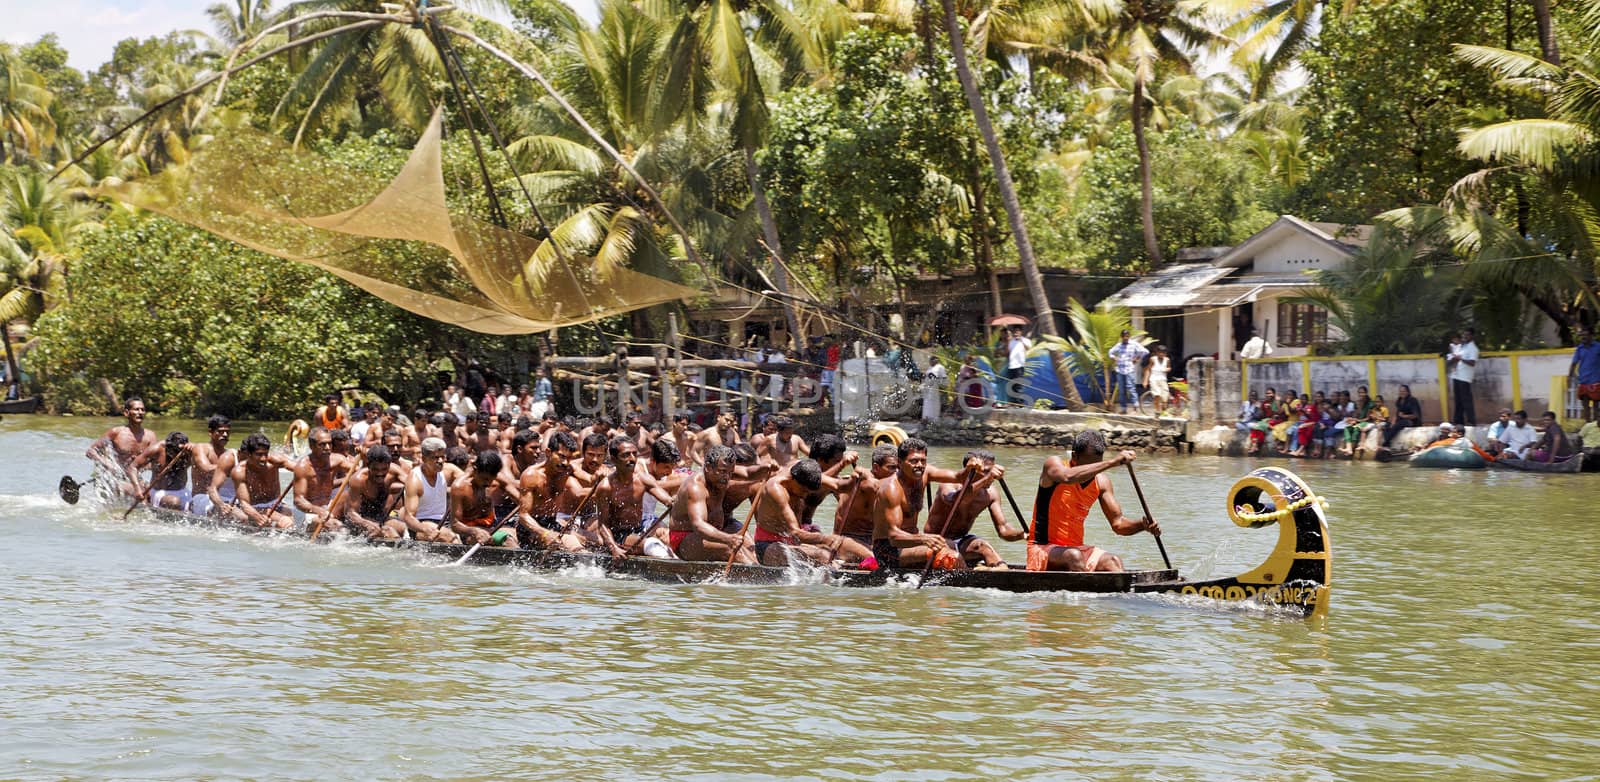 North Paravoor, Gothuruth, Kerala, India, Asia - September 25th, 2011: Gothuruth Boat Race two snake boats racing to the finish line, crop margin copy space horizontal landscape